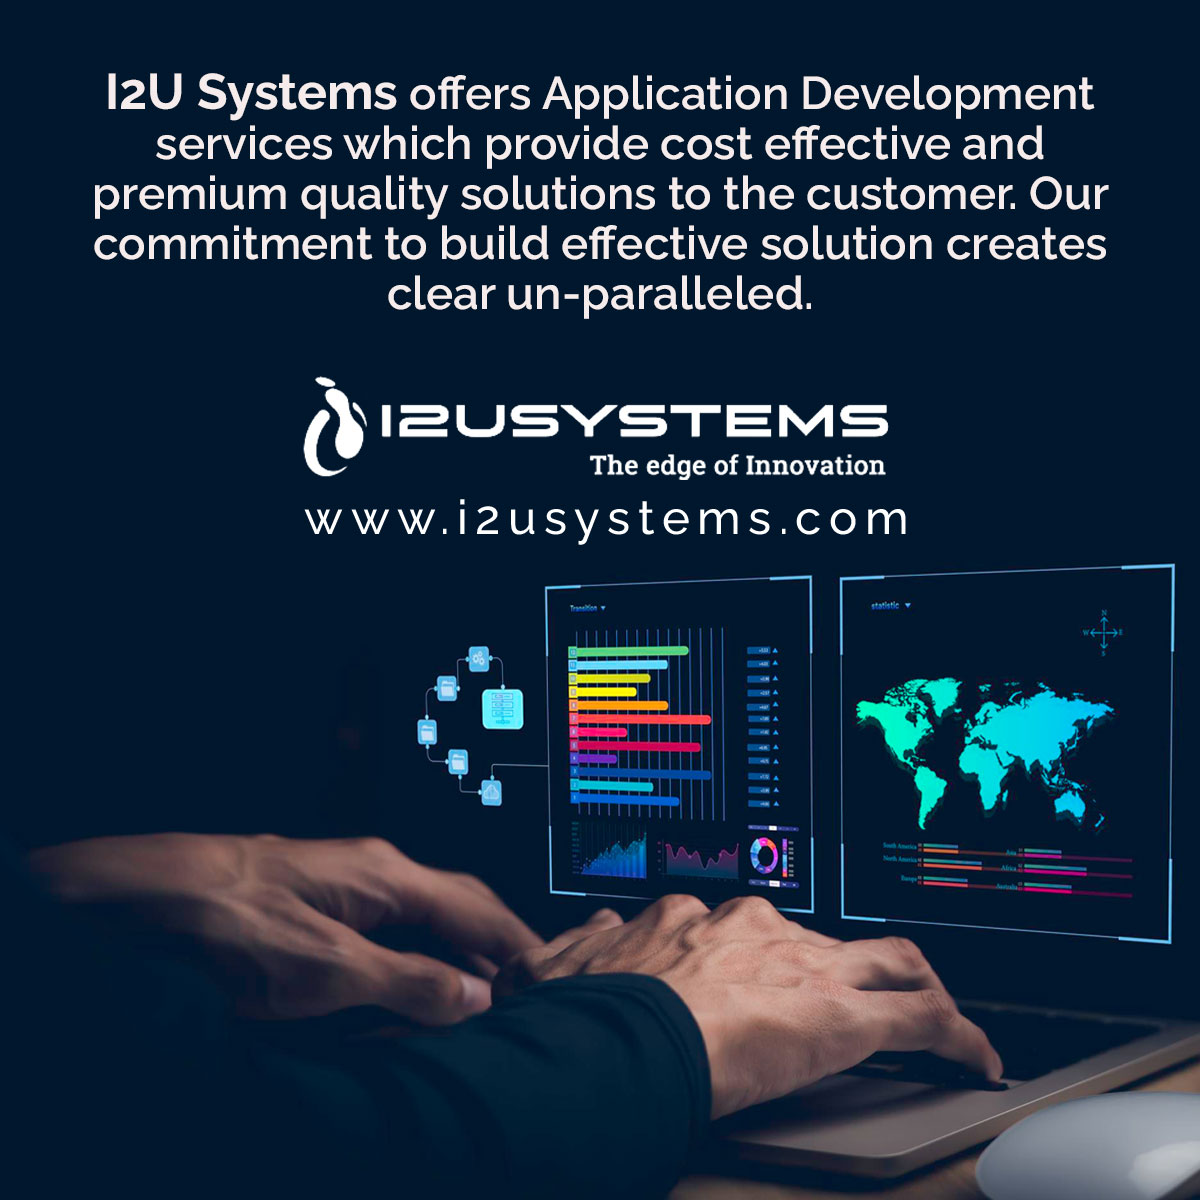 I2U Systems offers Application Development services which provide cost effective and premium quality solutions to the customer. #i2usystems #c2crequirements #w2jobs #directclient #benchsales #IOT #digital #application #development #customer #paralleled